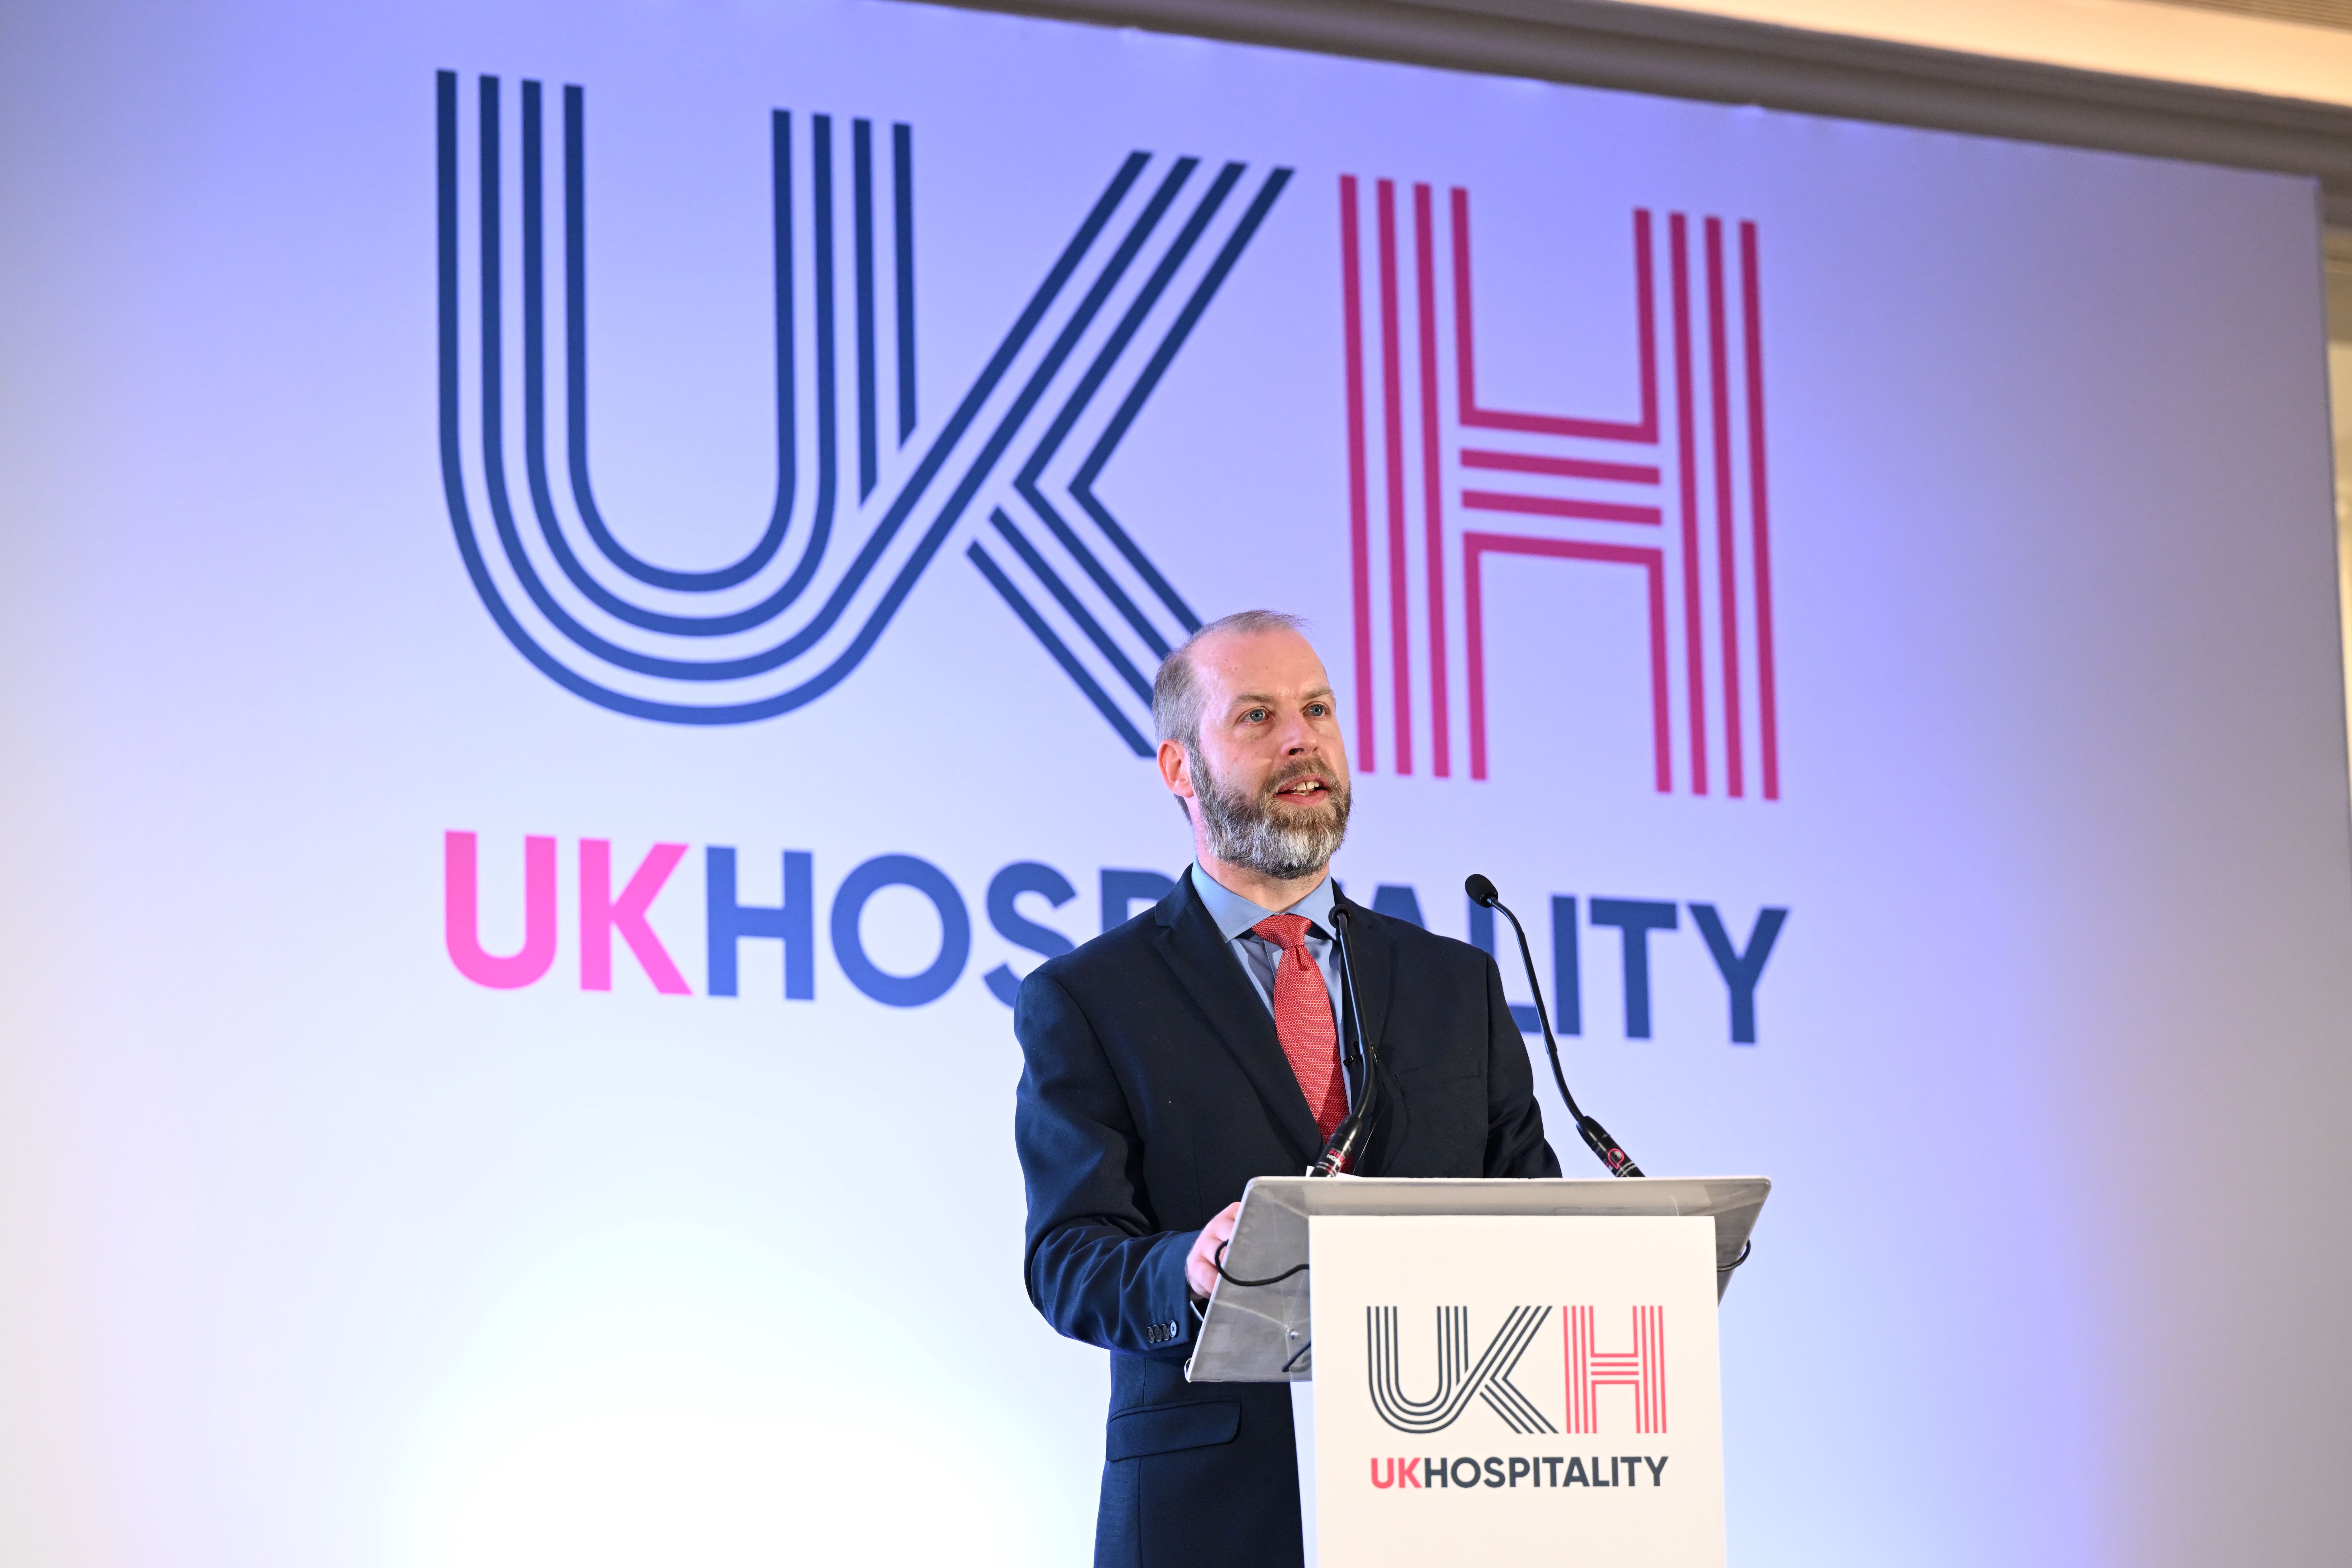 Jonathan delivers his speech to the UK Hospitality Summer Conference